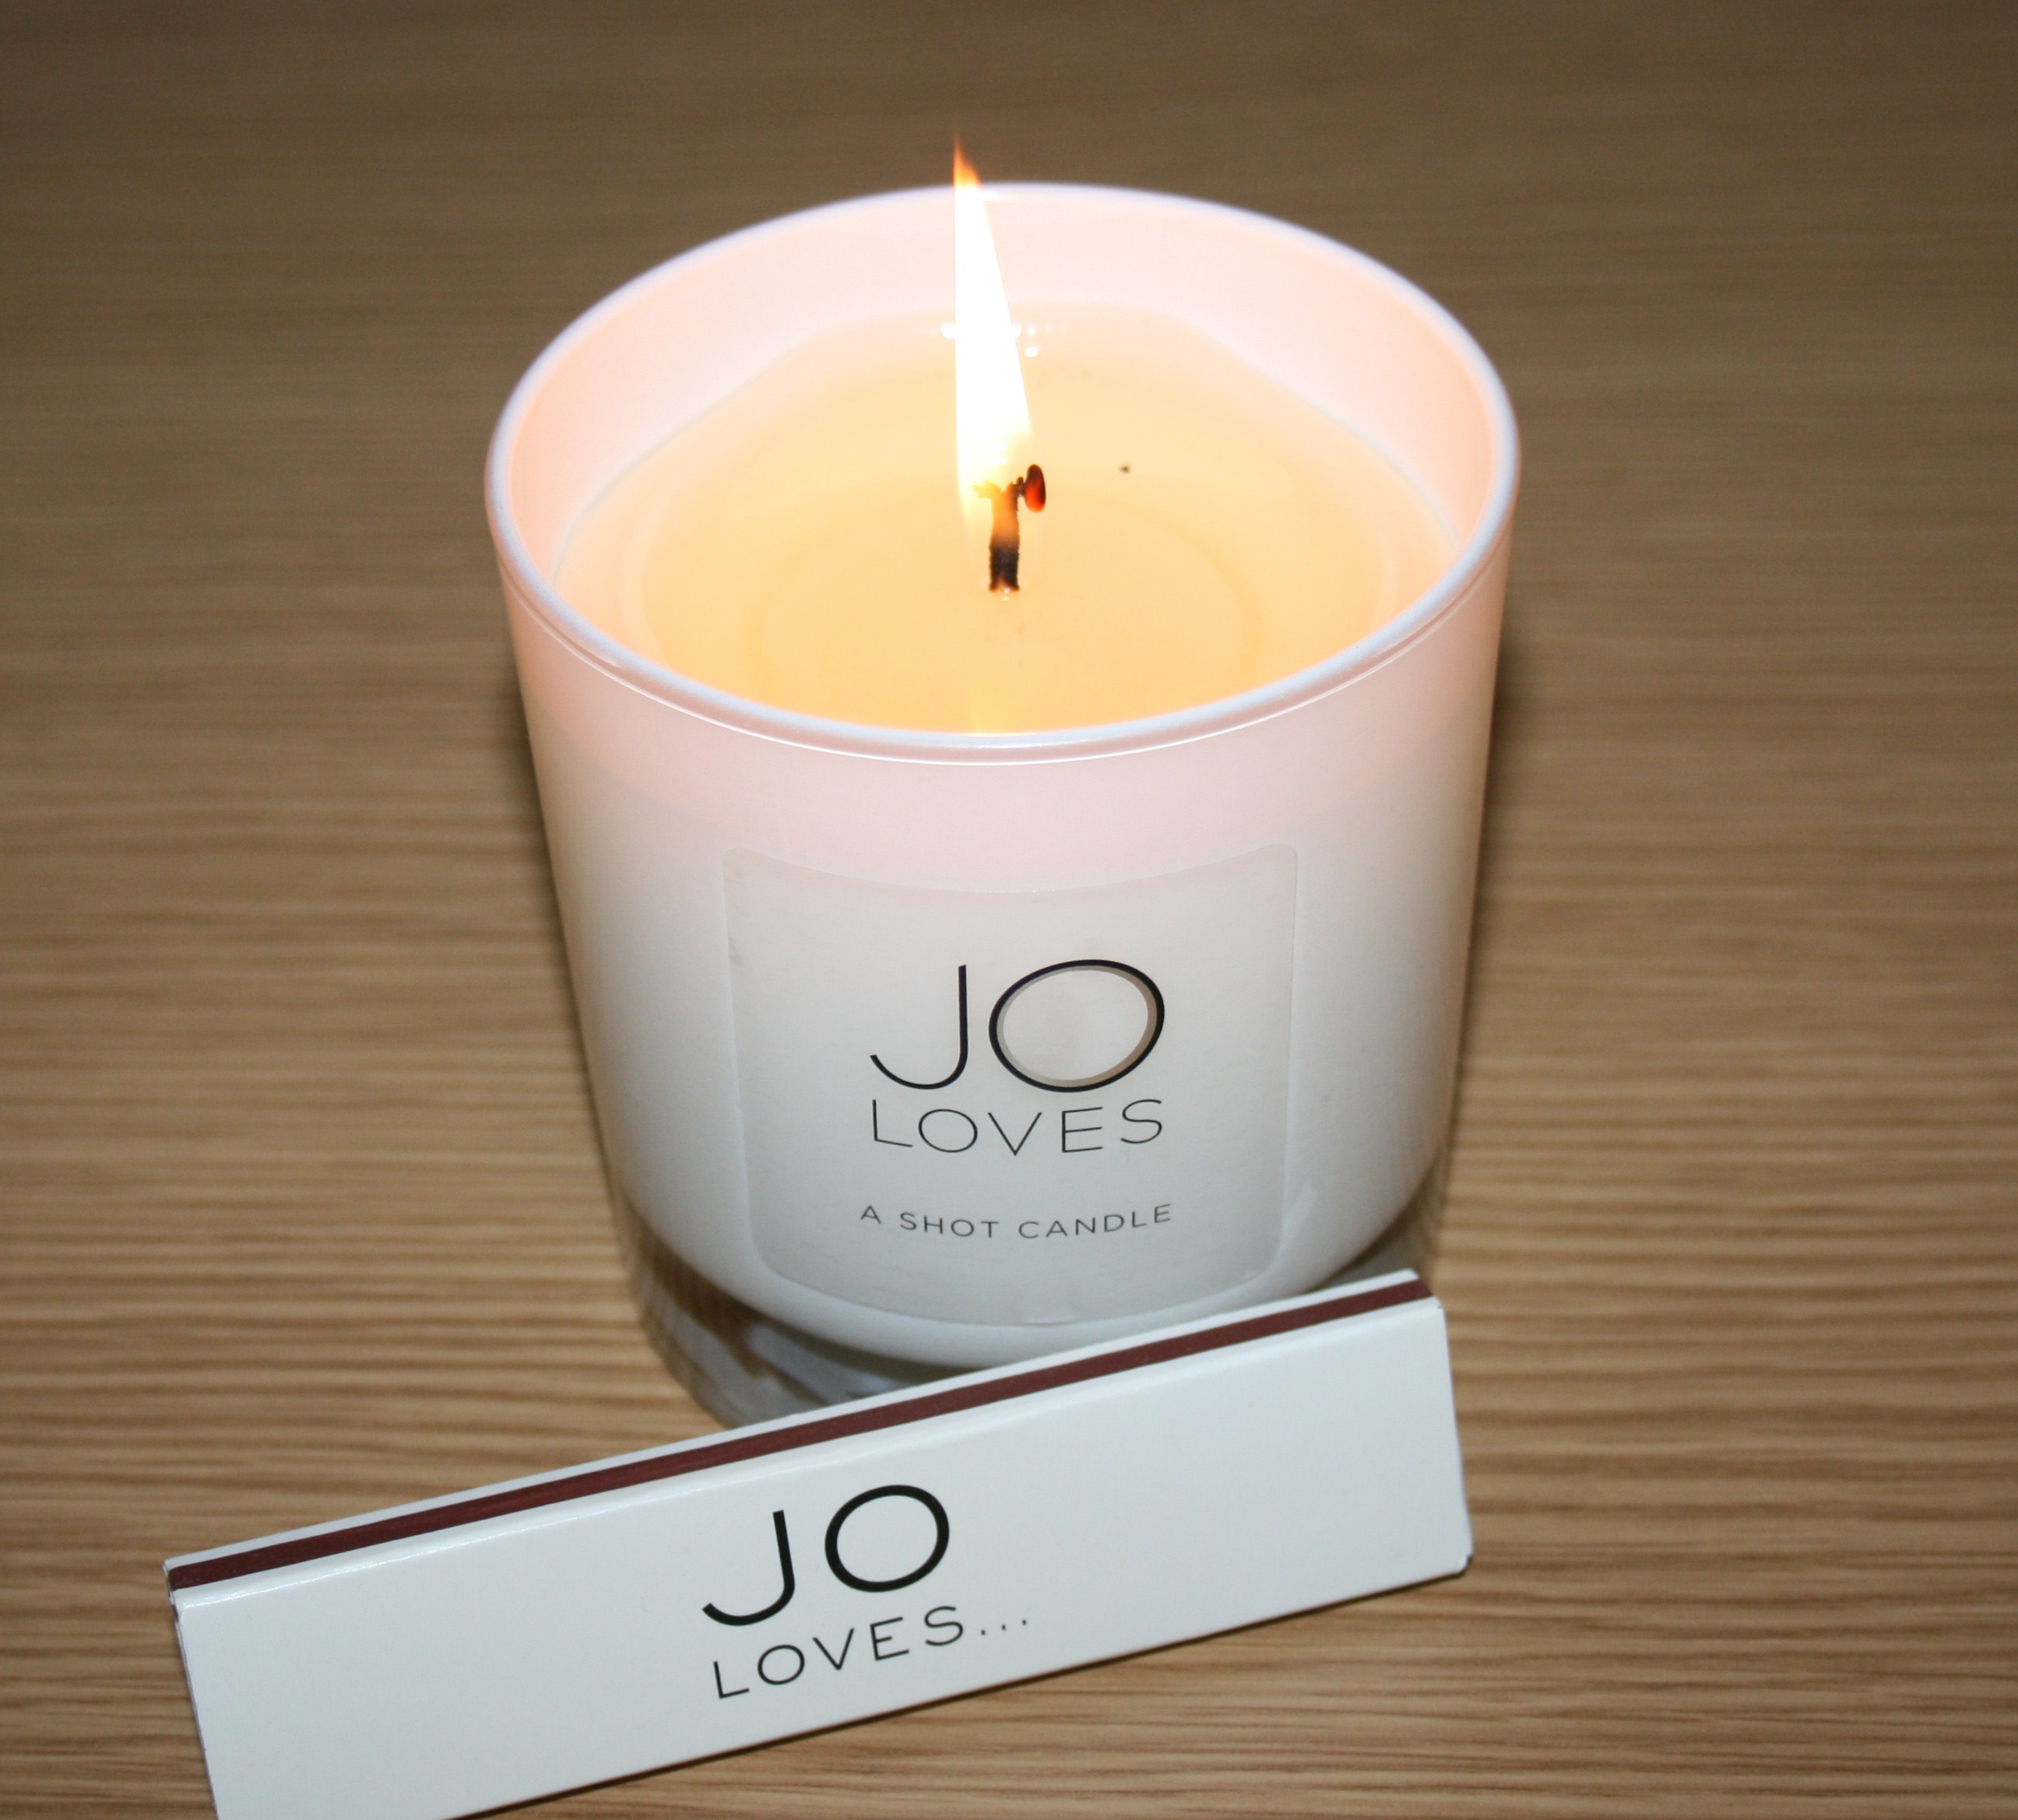 Jo Loves Shot Candle: Salted Caramel and Fig Trees